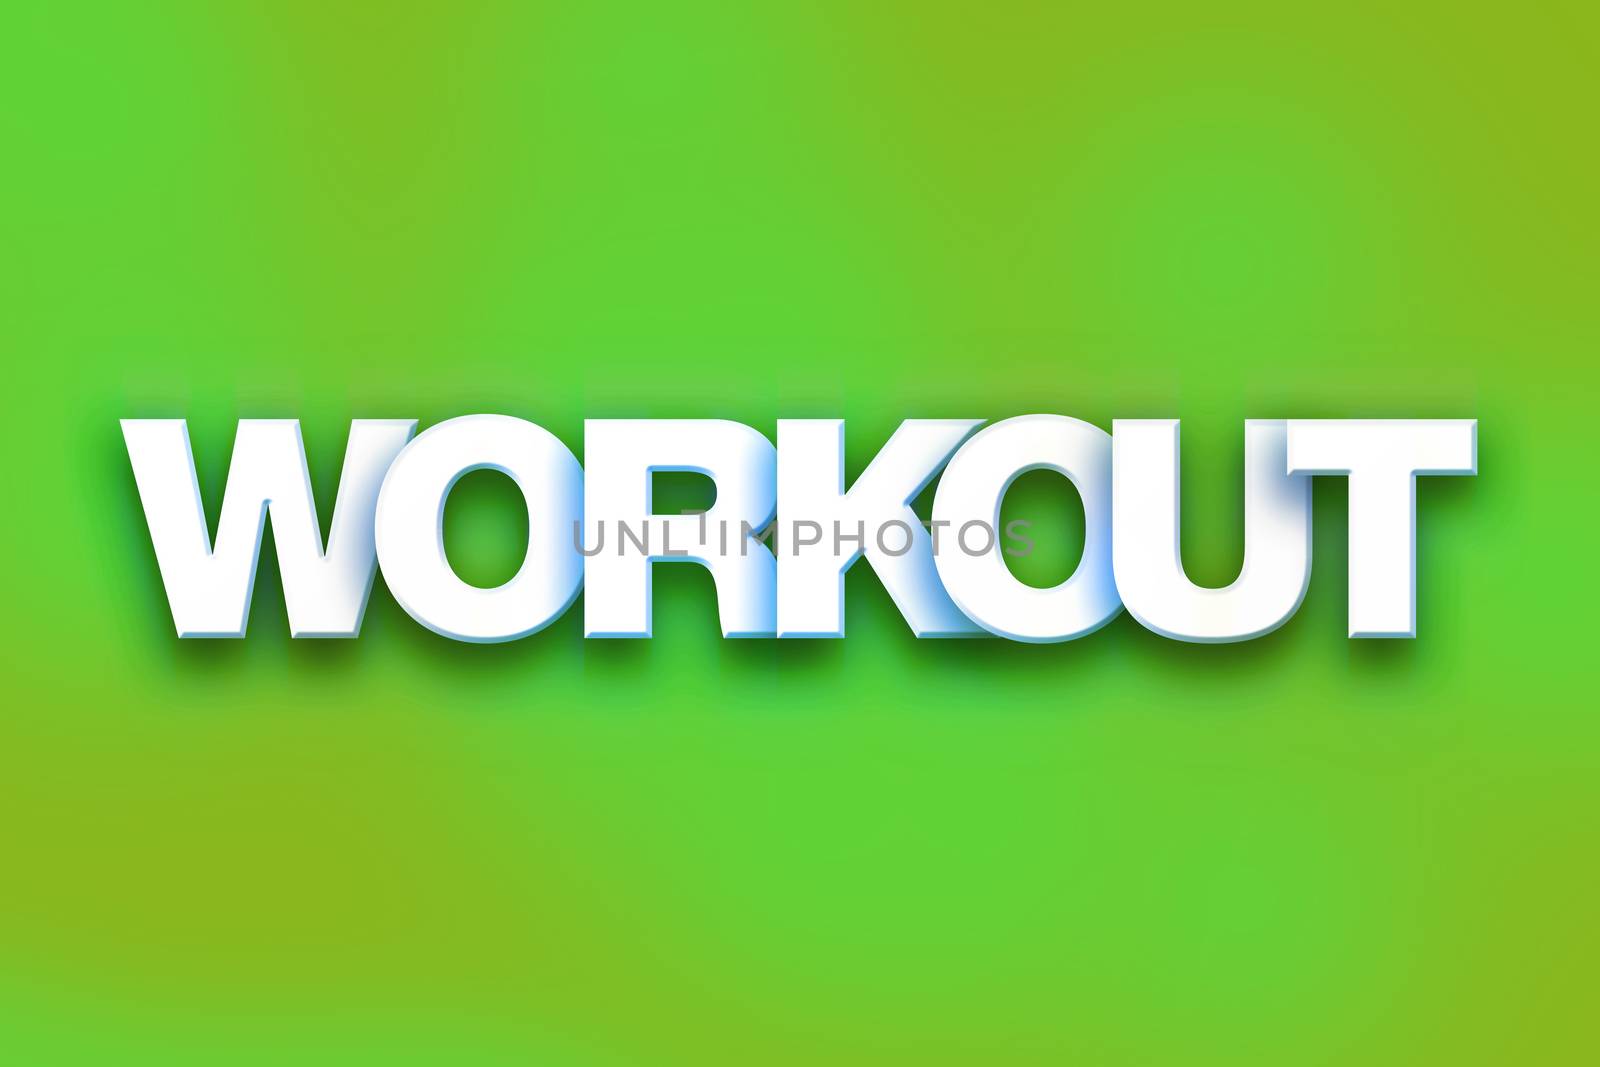 The word "Workout" written in white 3D letters on a colorful background concept and theme.